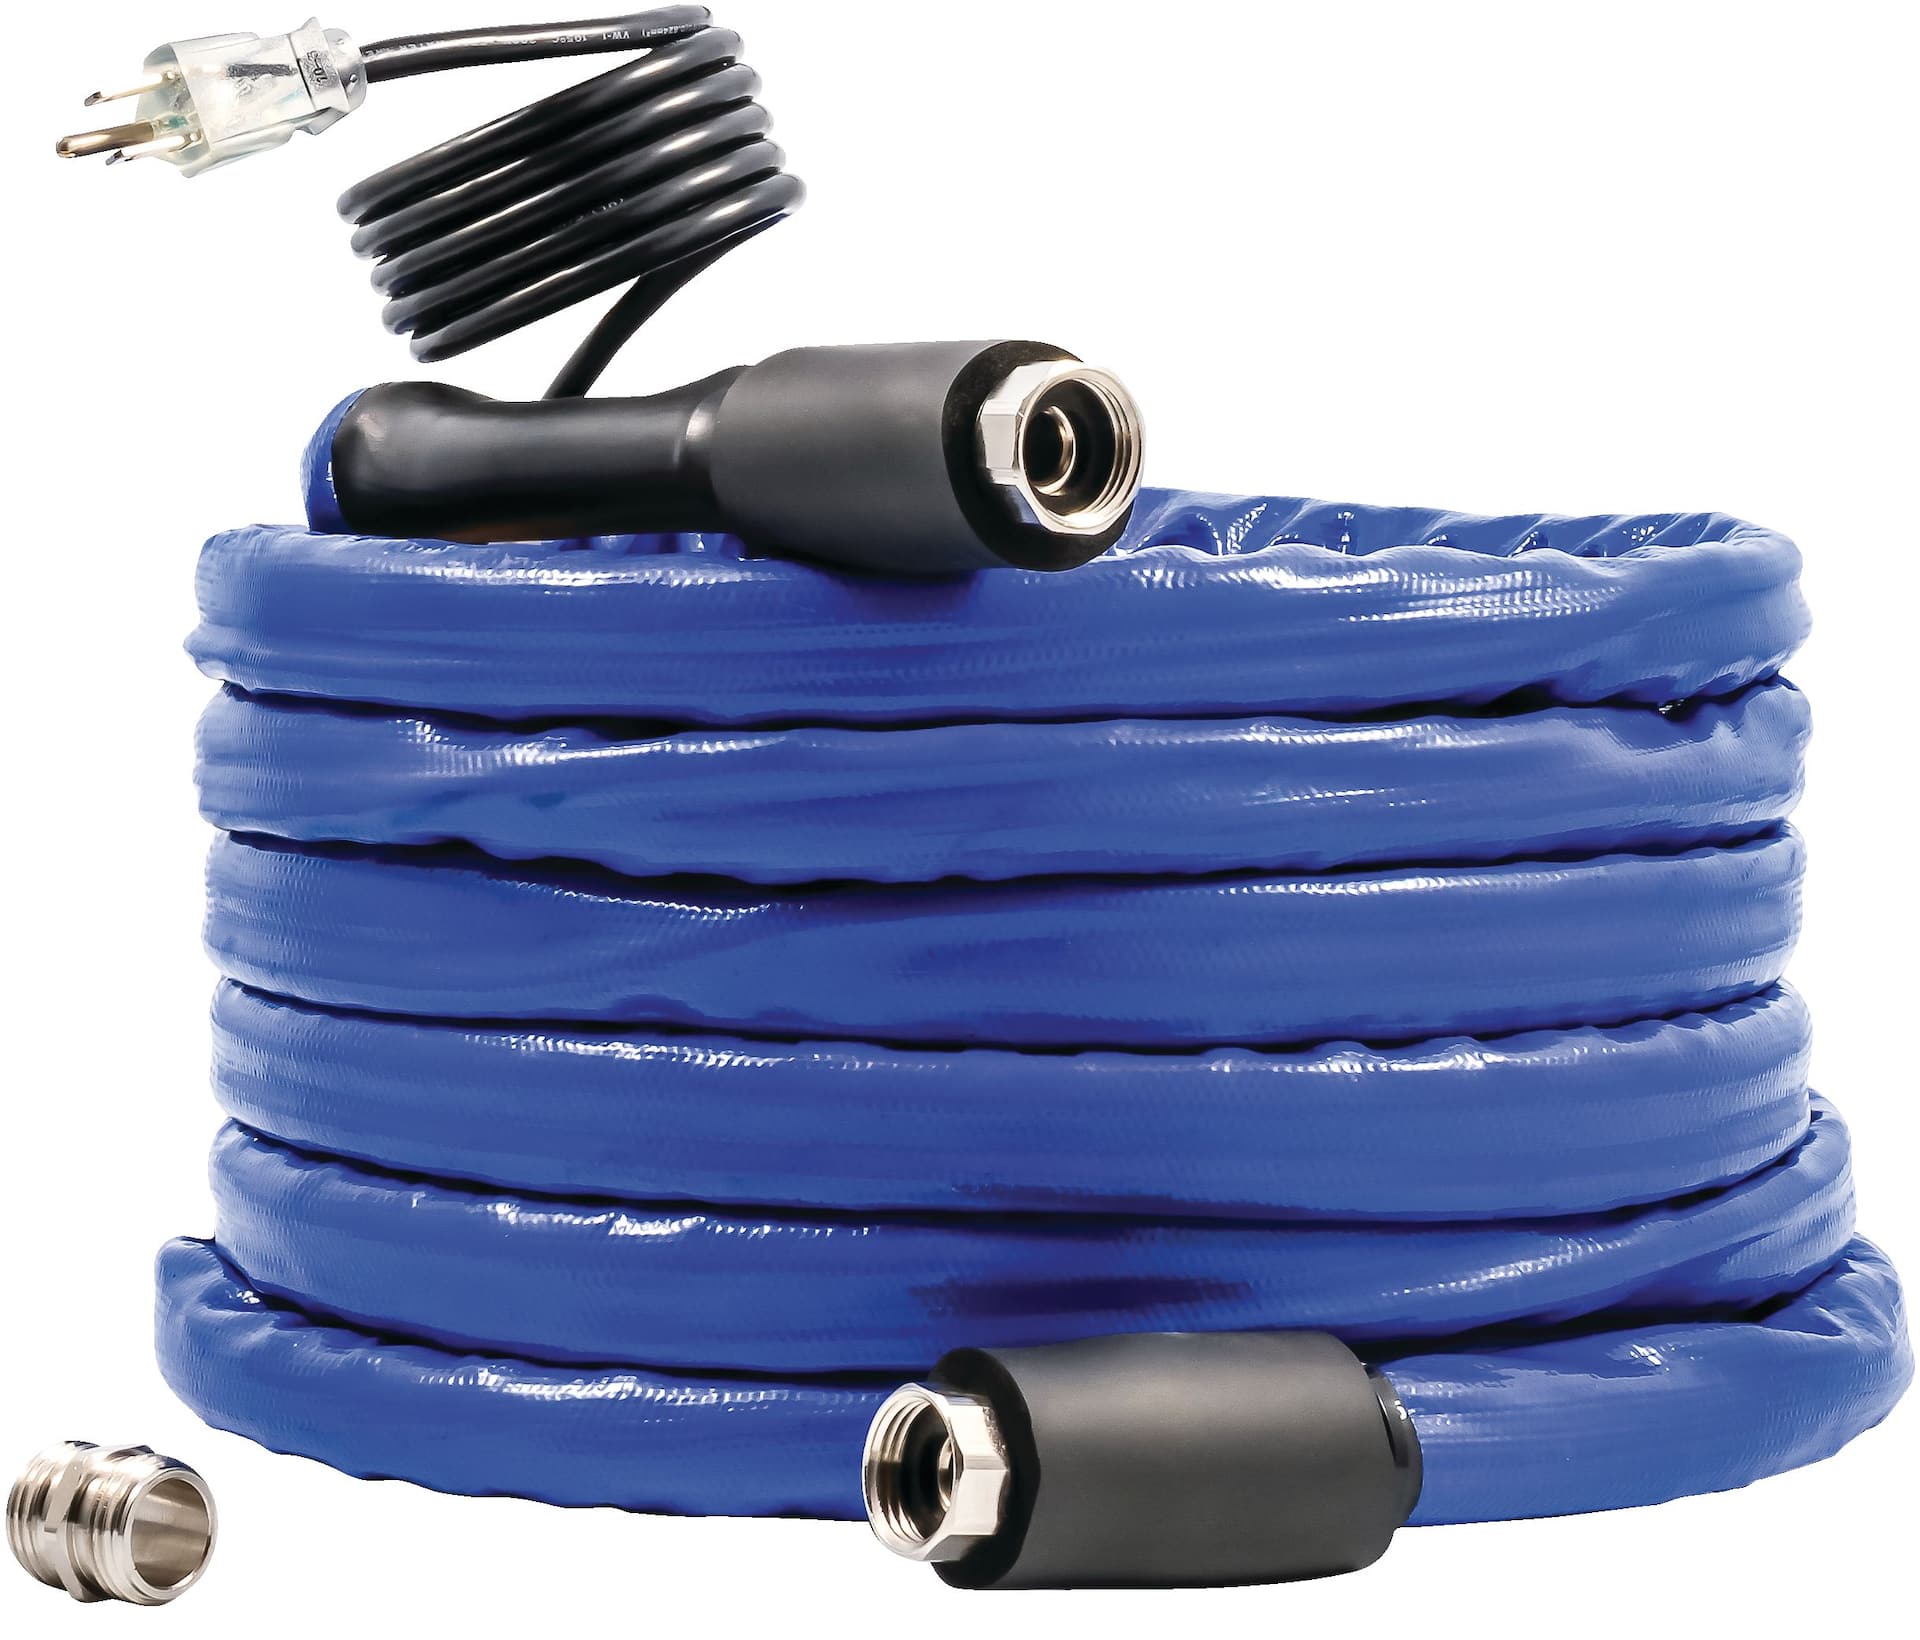 CAMCO 22911 25-ft 5/8-in ID Heated Drinking Water Hose